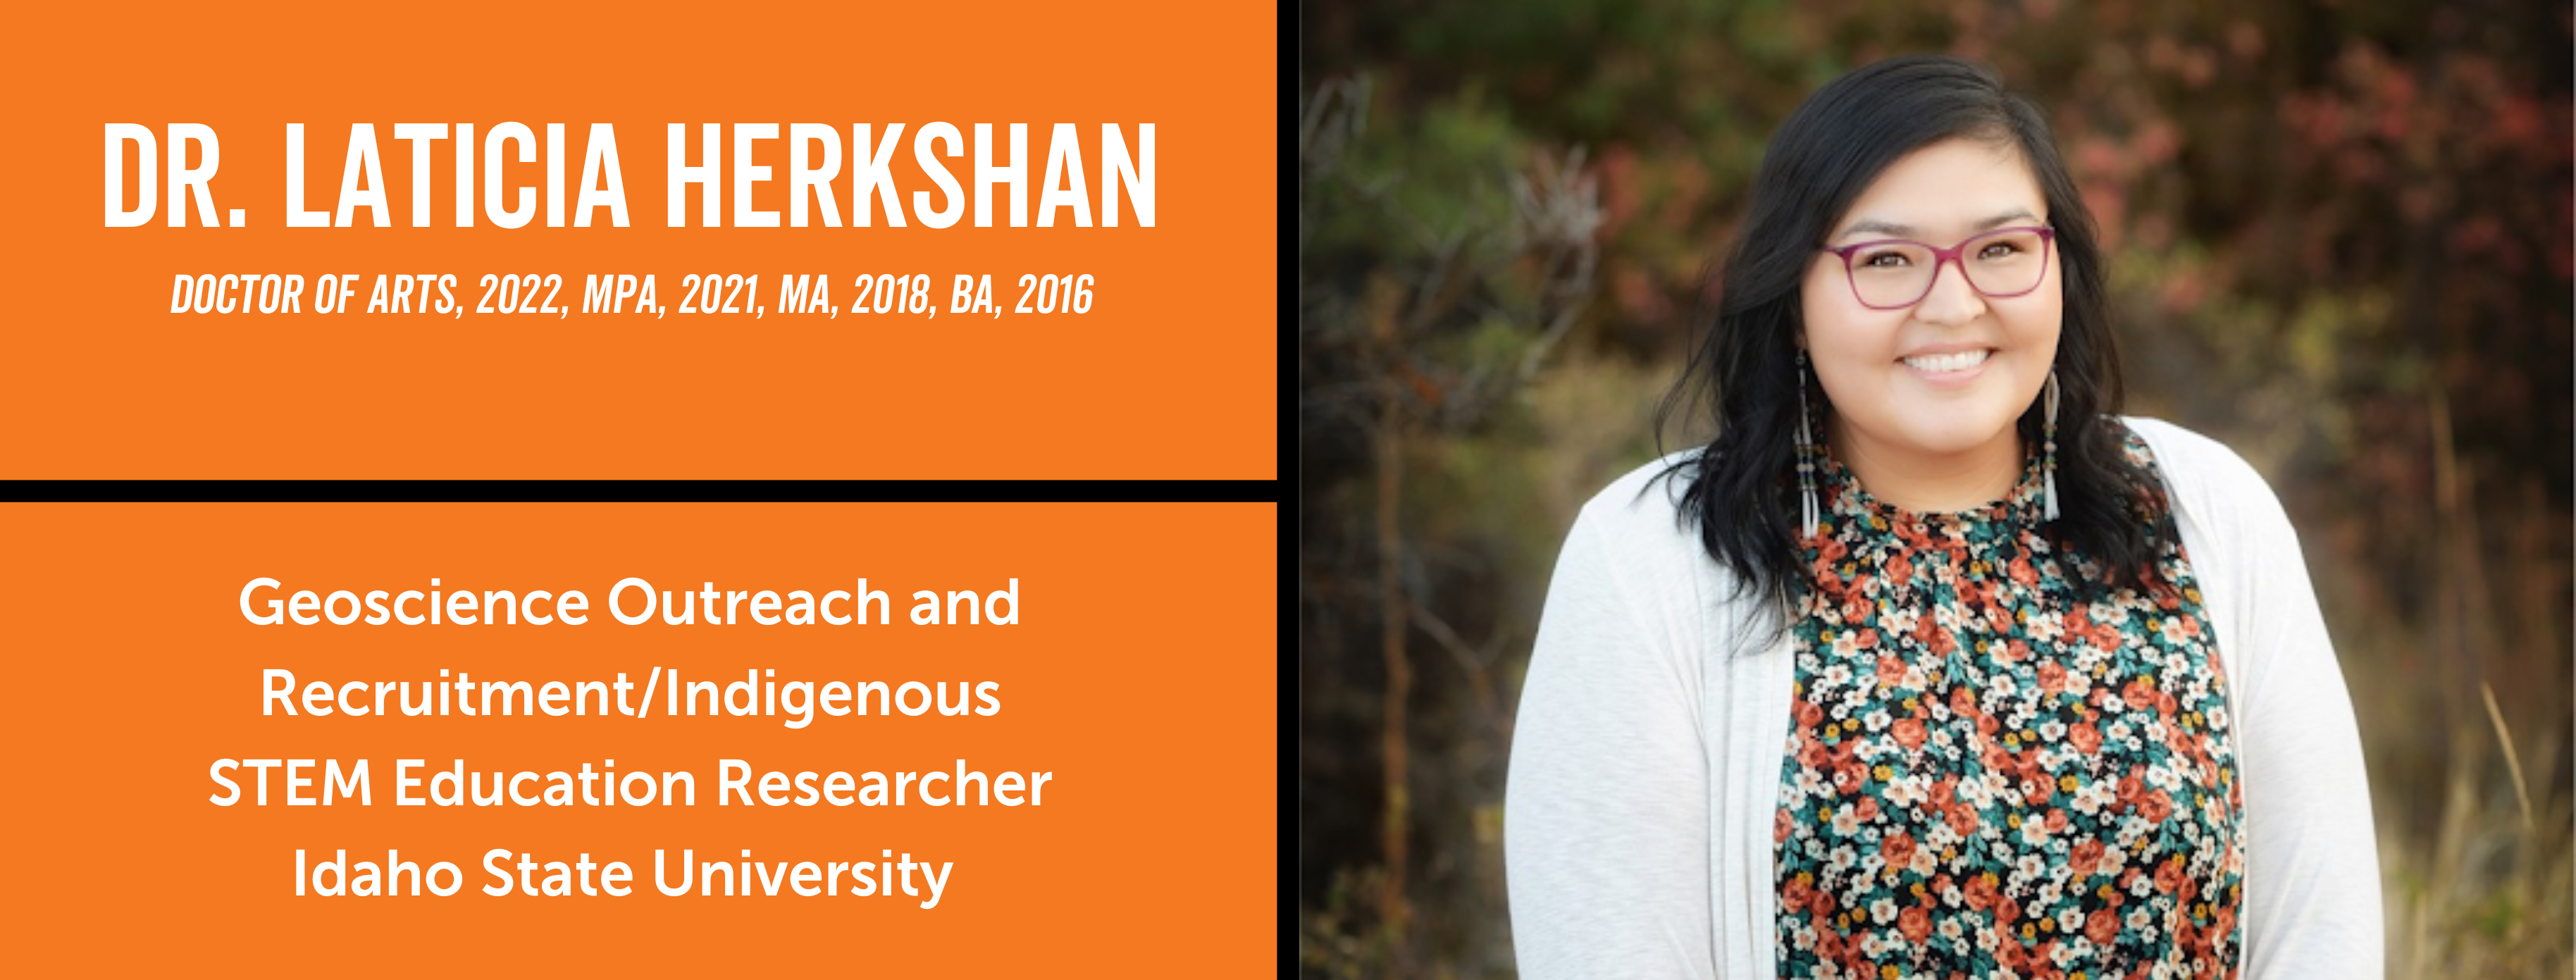 Alumna Dr. Laticia Herkshan, Doctor of Arts 2022, MPA 2021, MA 2018, BA 2016, Geoscience outreach and recruitment/indigenous STEM education researcher at ISU